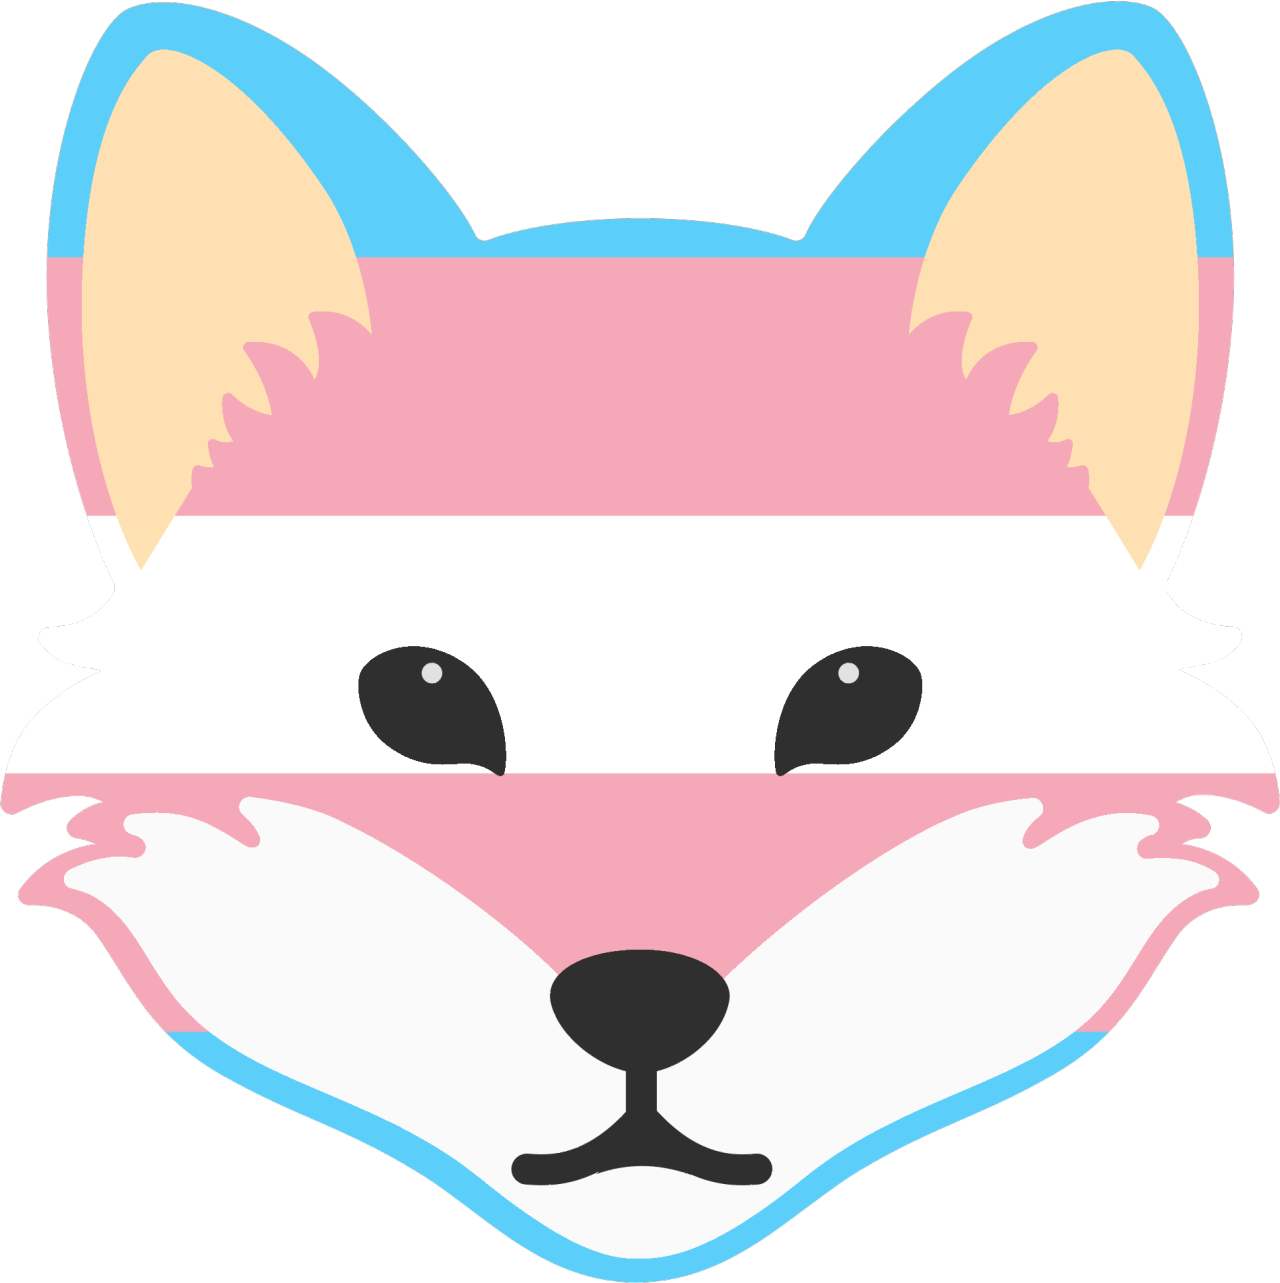 A fox emoji with the colors of the trans flag.